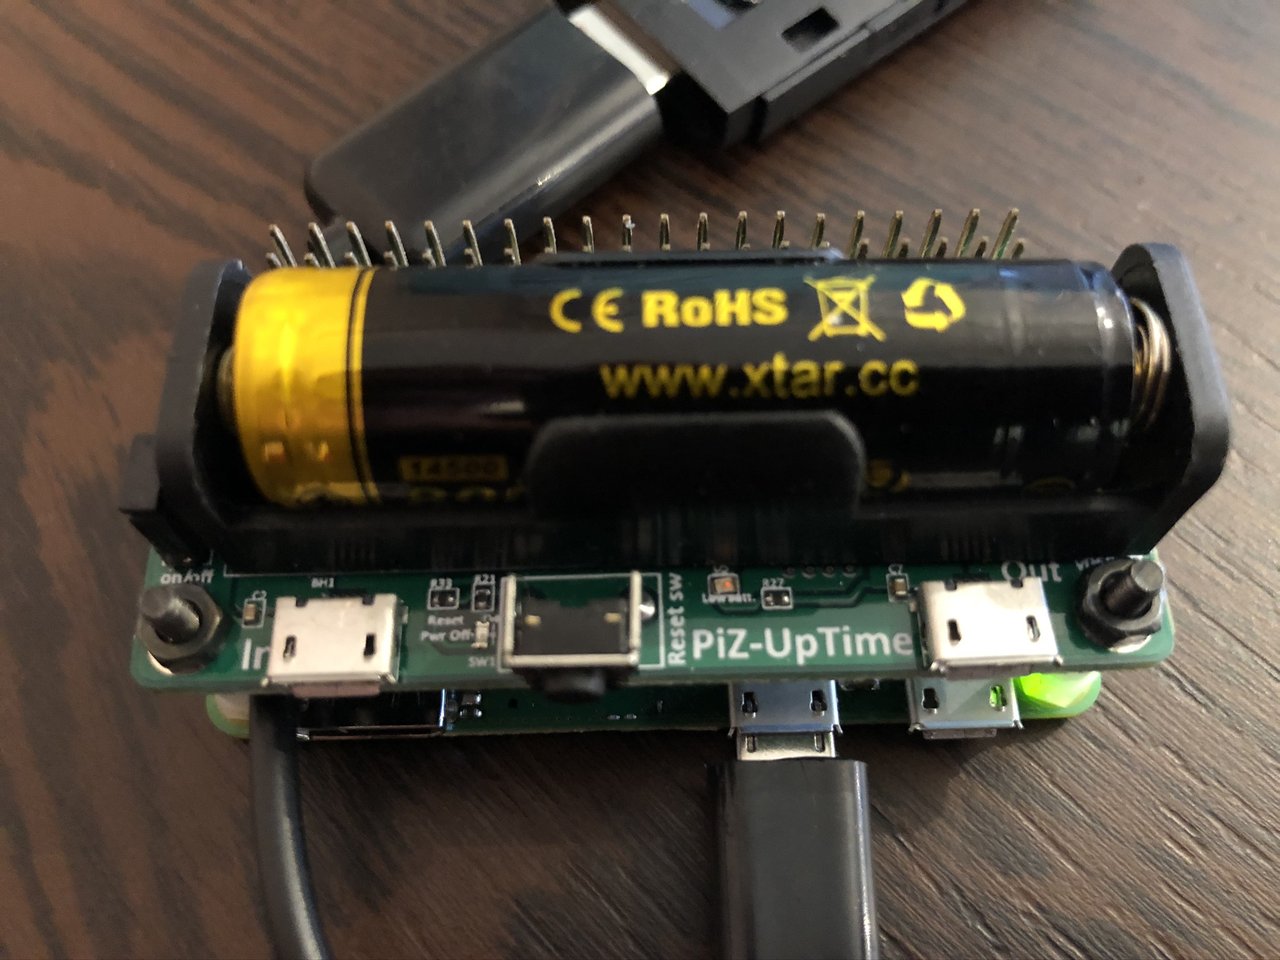 Photo of Prototype-01 on a table showing the battery module and LTE USB stick connected to the Raspberry Pi.